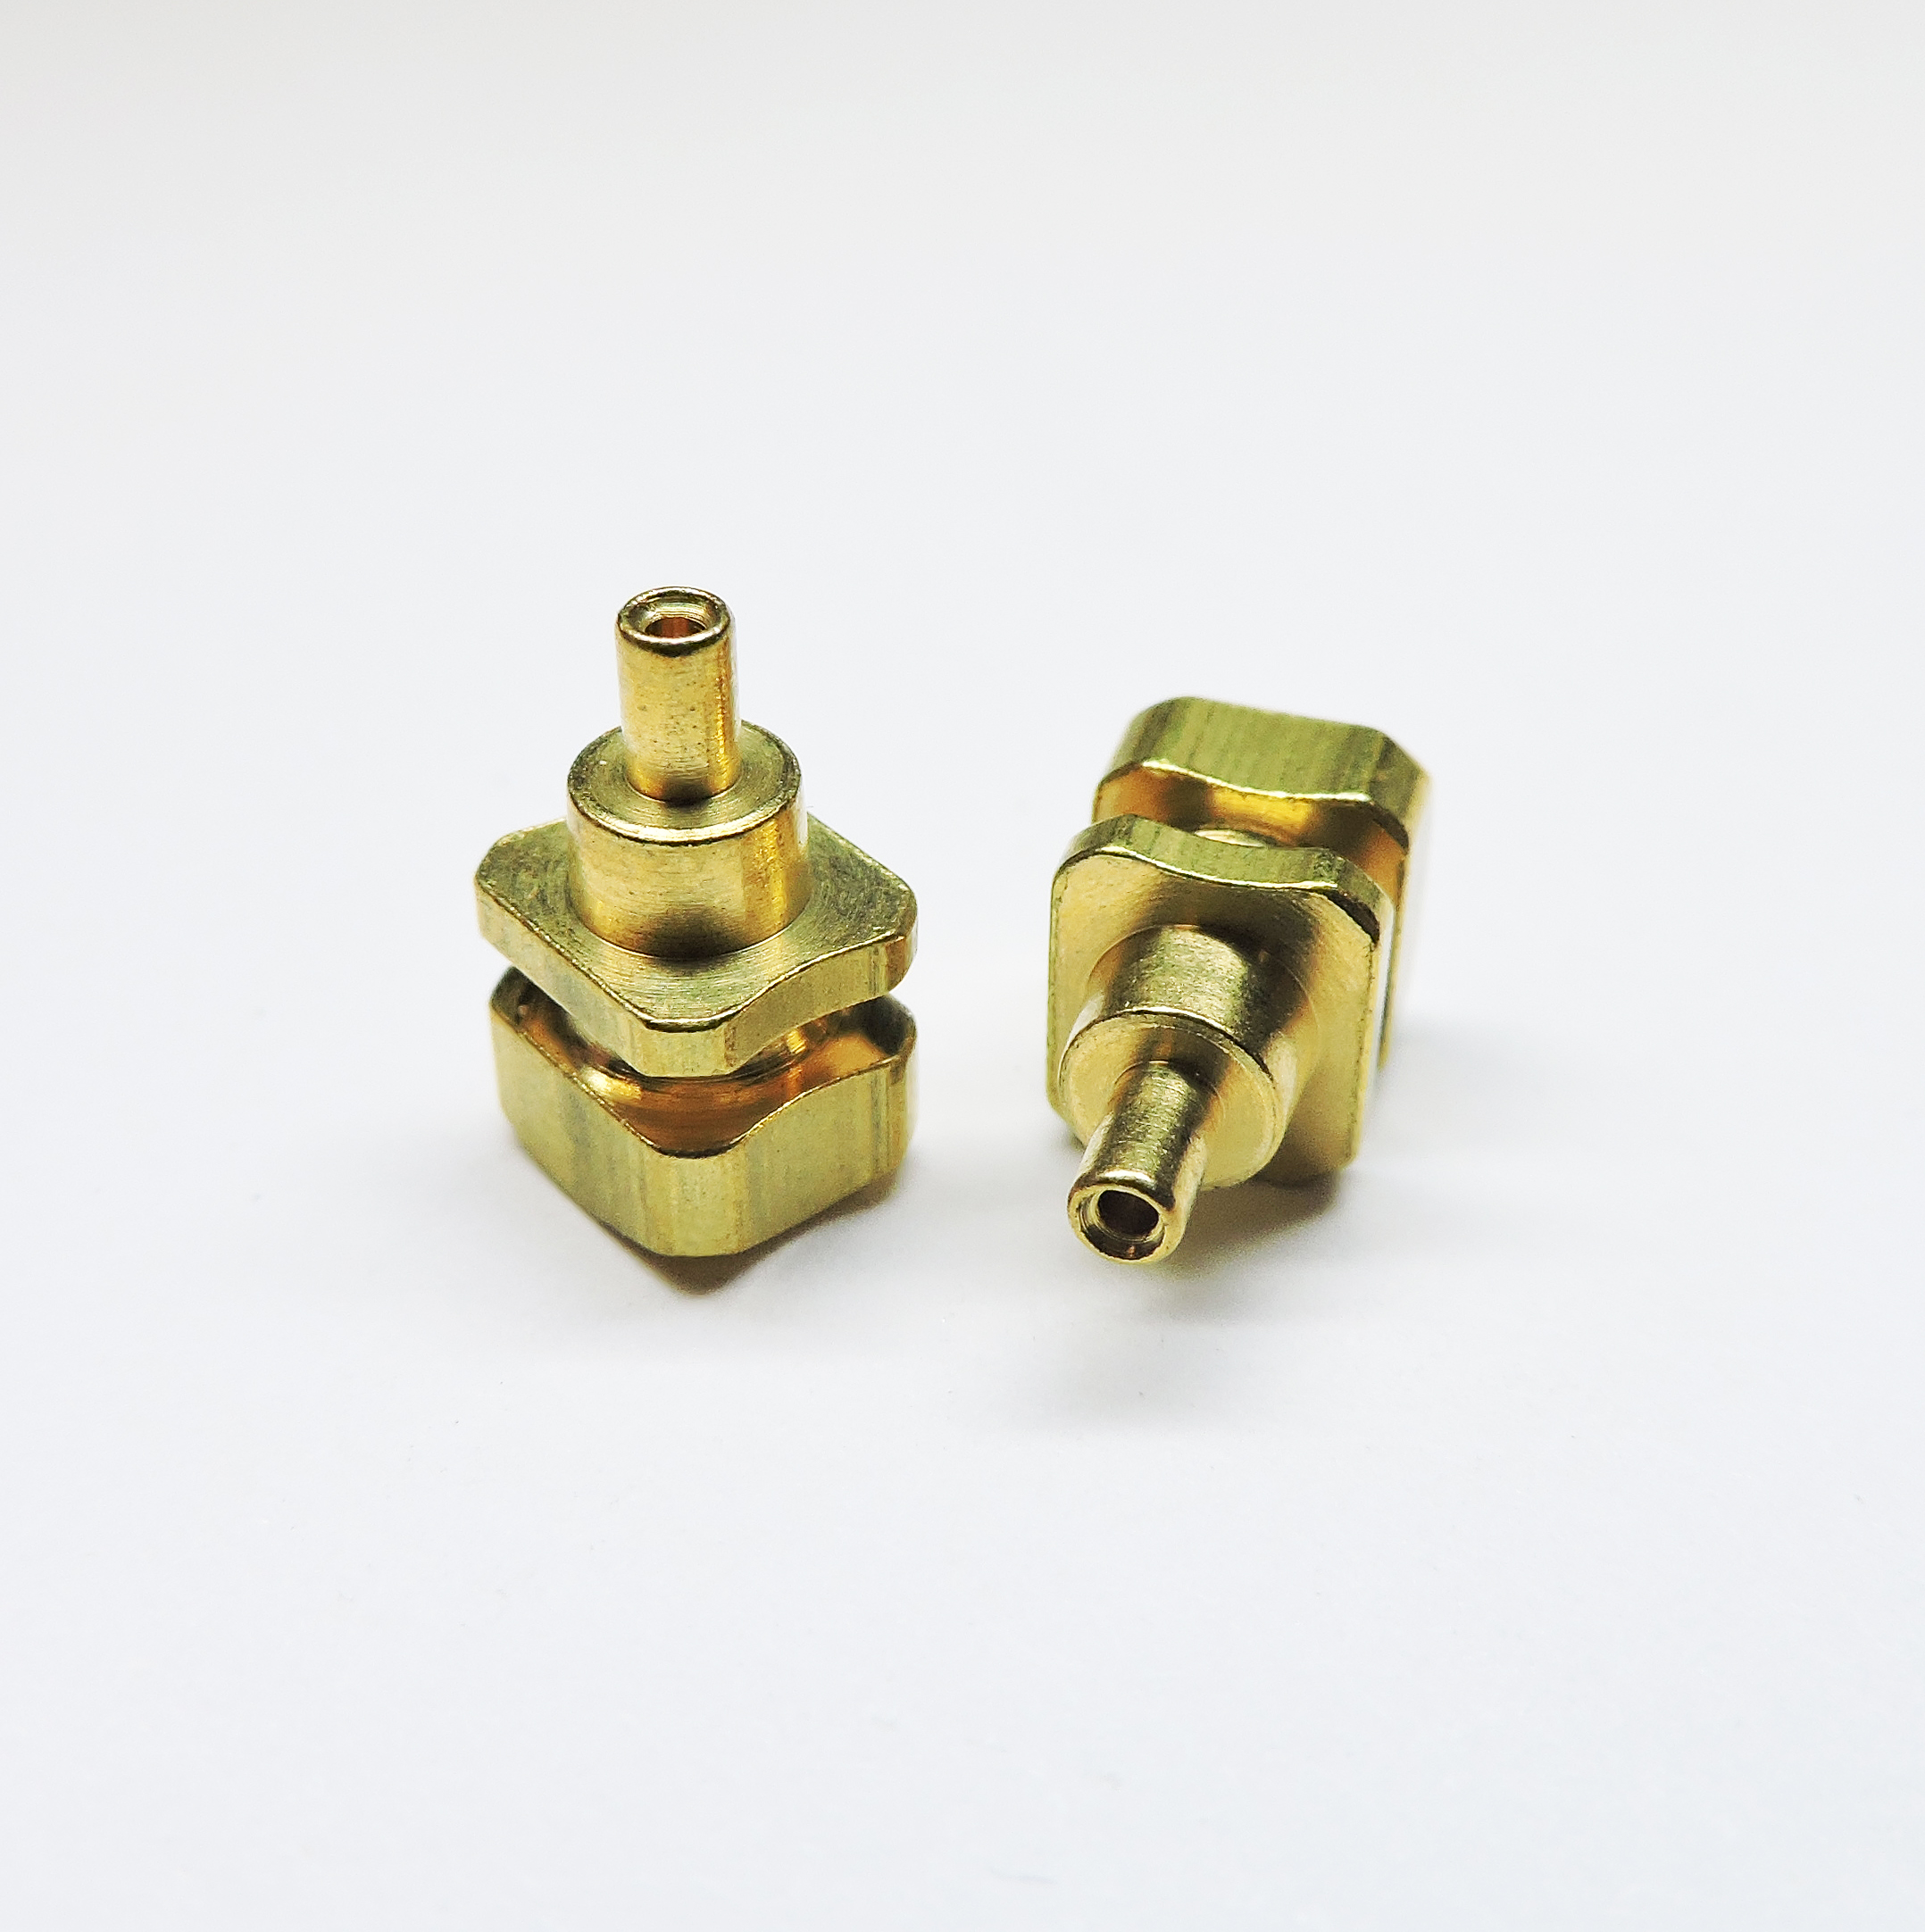 Precision Screw Machined Brass Medical Stylet Cap